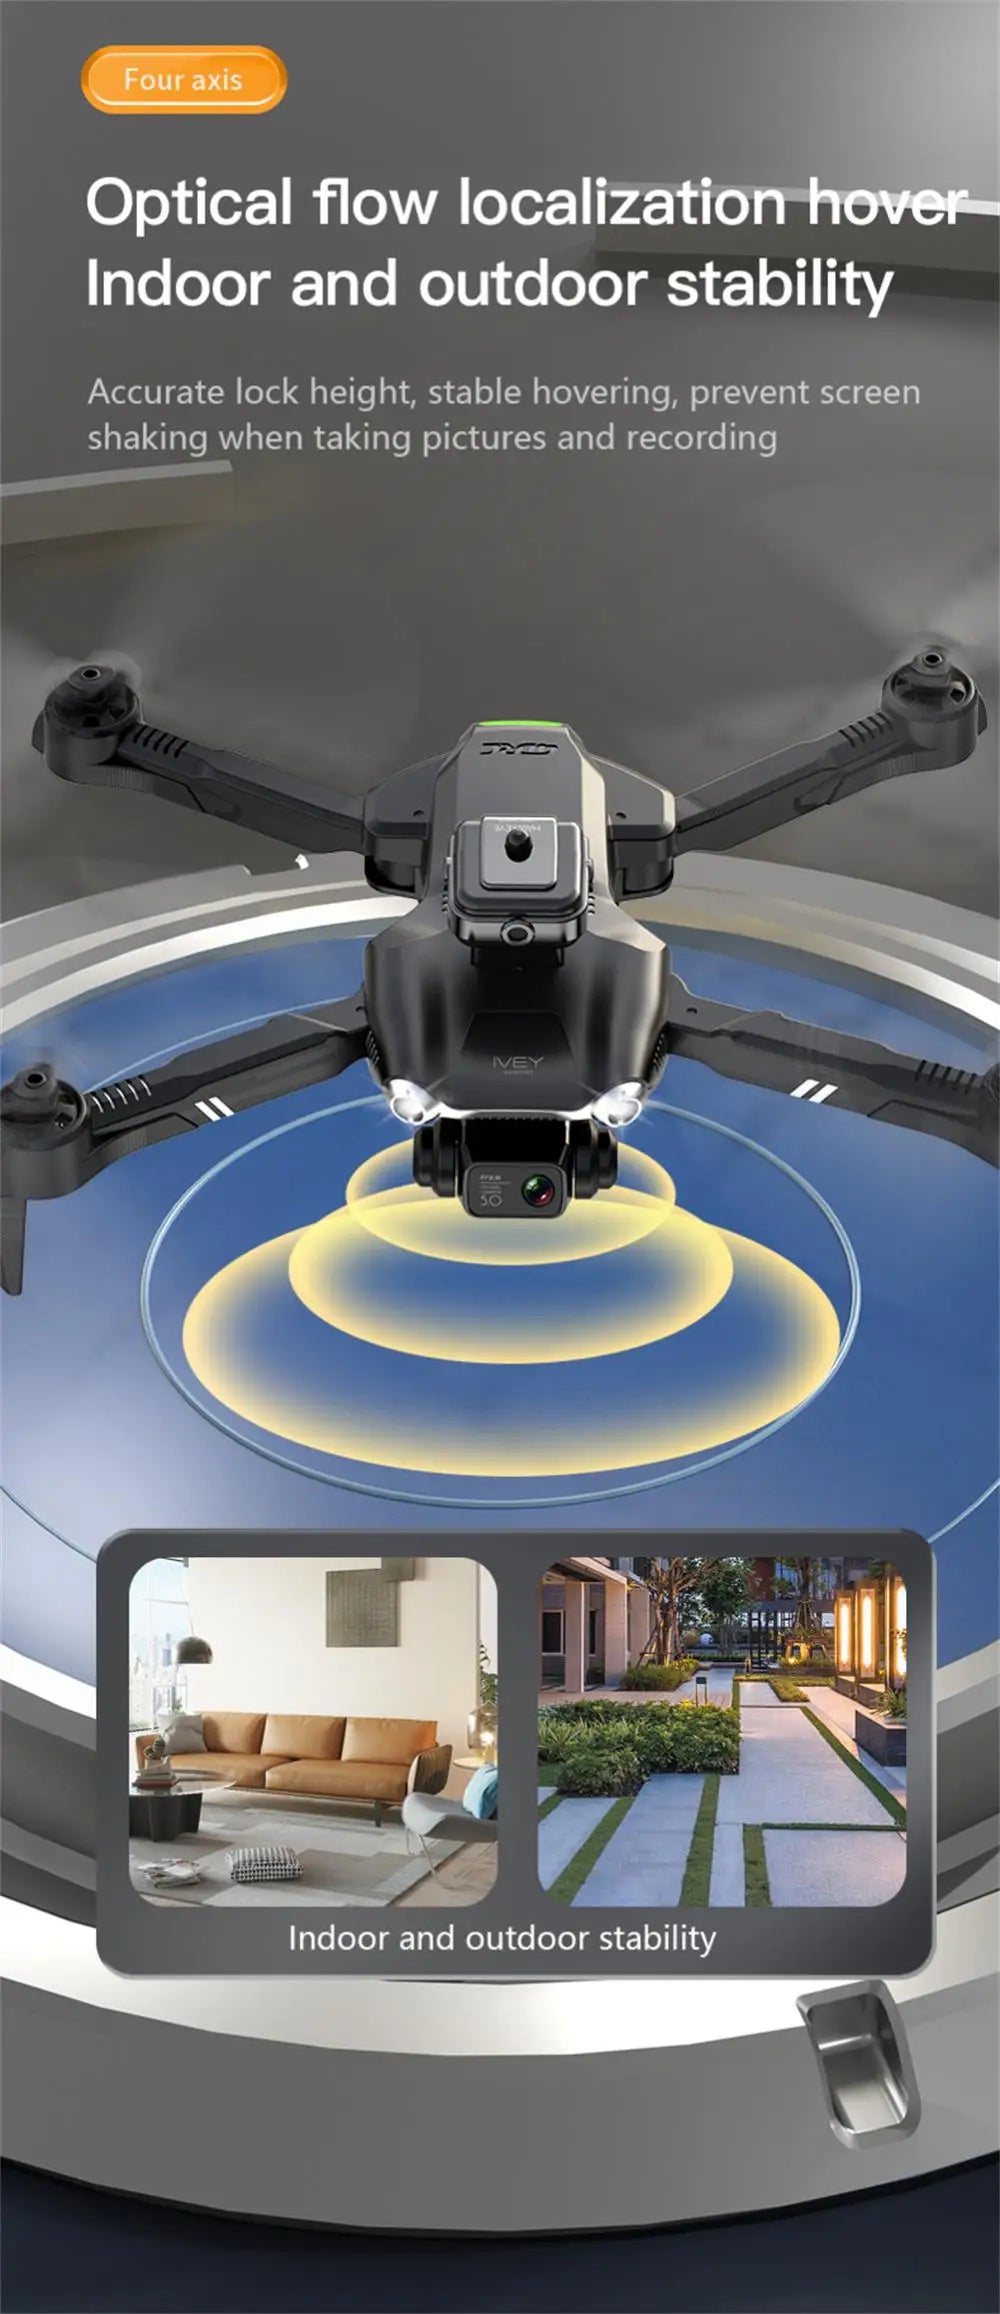 V28 Drone, four axis optical flow localization hover indoor and outdoor stability 